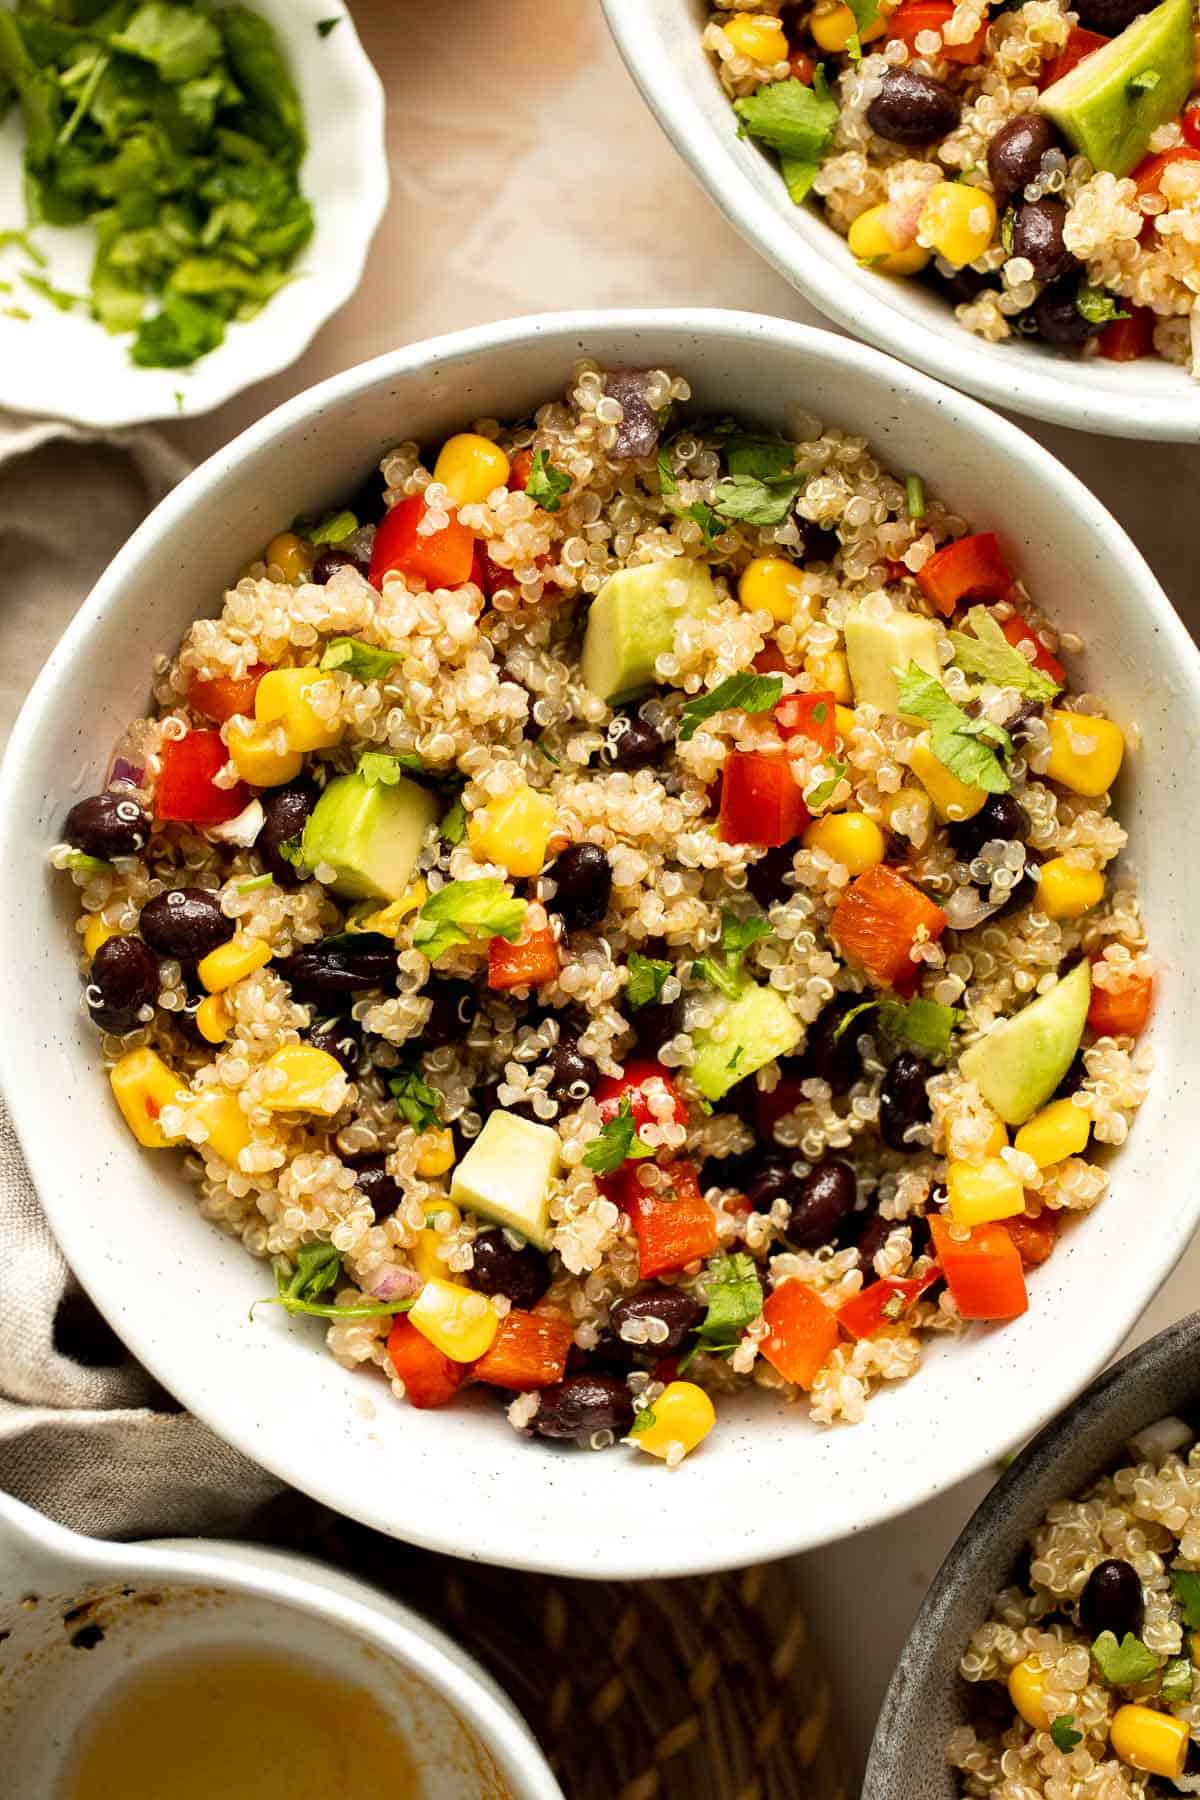 Southwest Quinoa Salad is hearty, flavorful, and delicious. It's loaded with chunky vegetables and tender quinoa, coated in a tangy homemade dressing. | aheadofthyme.com